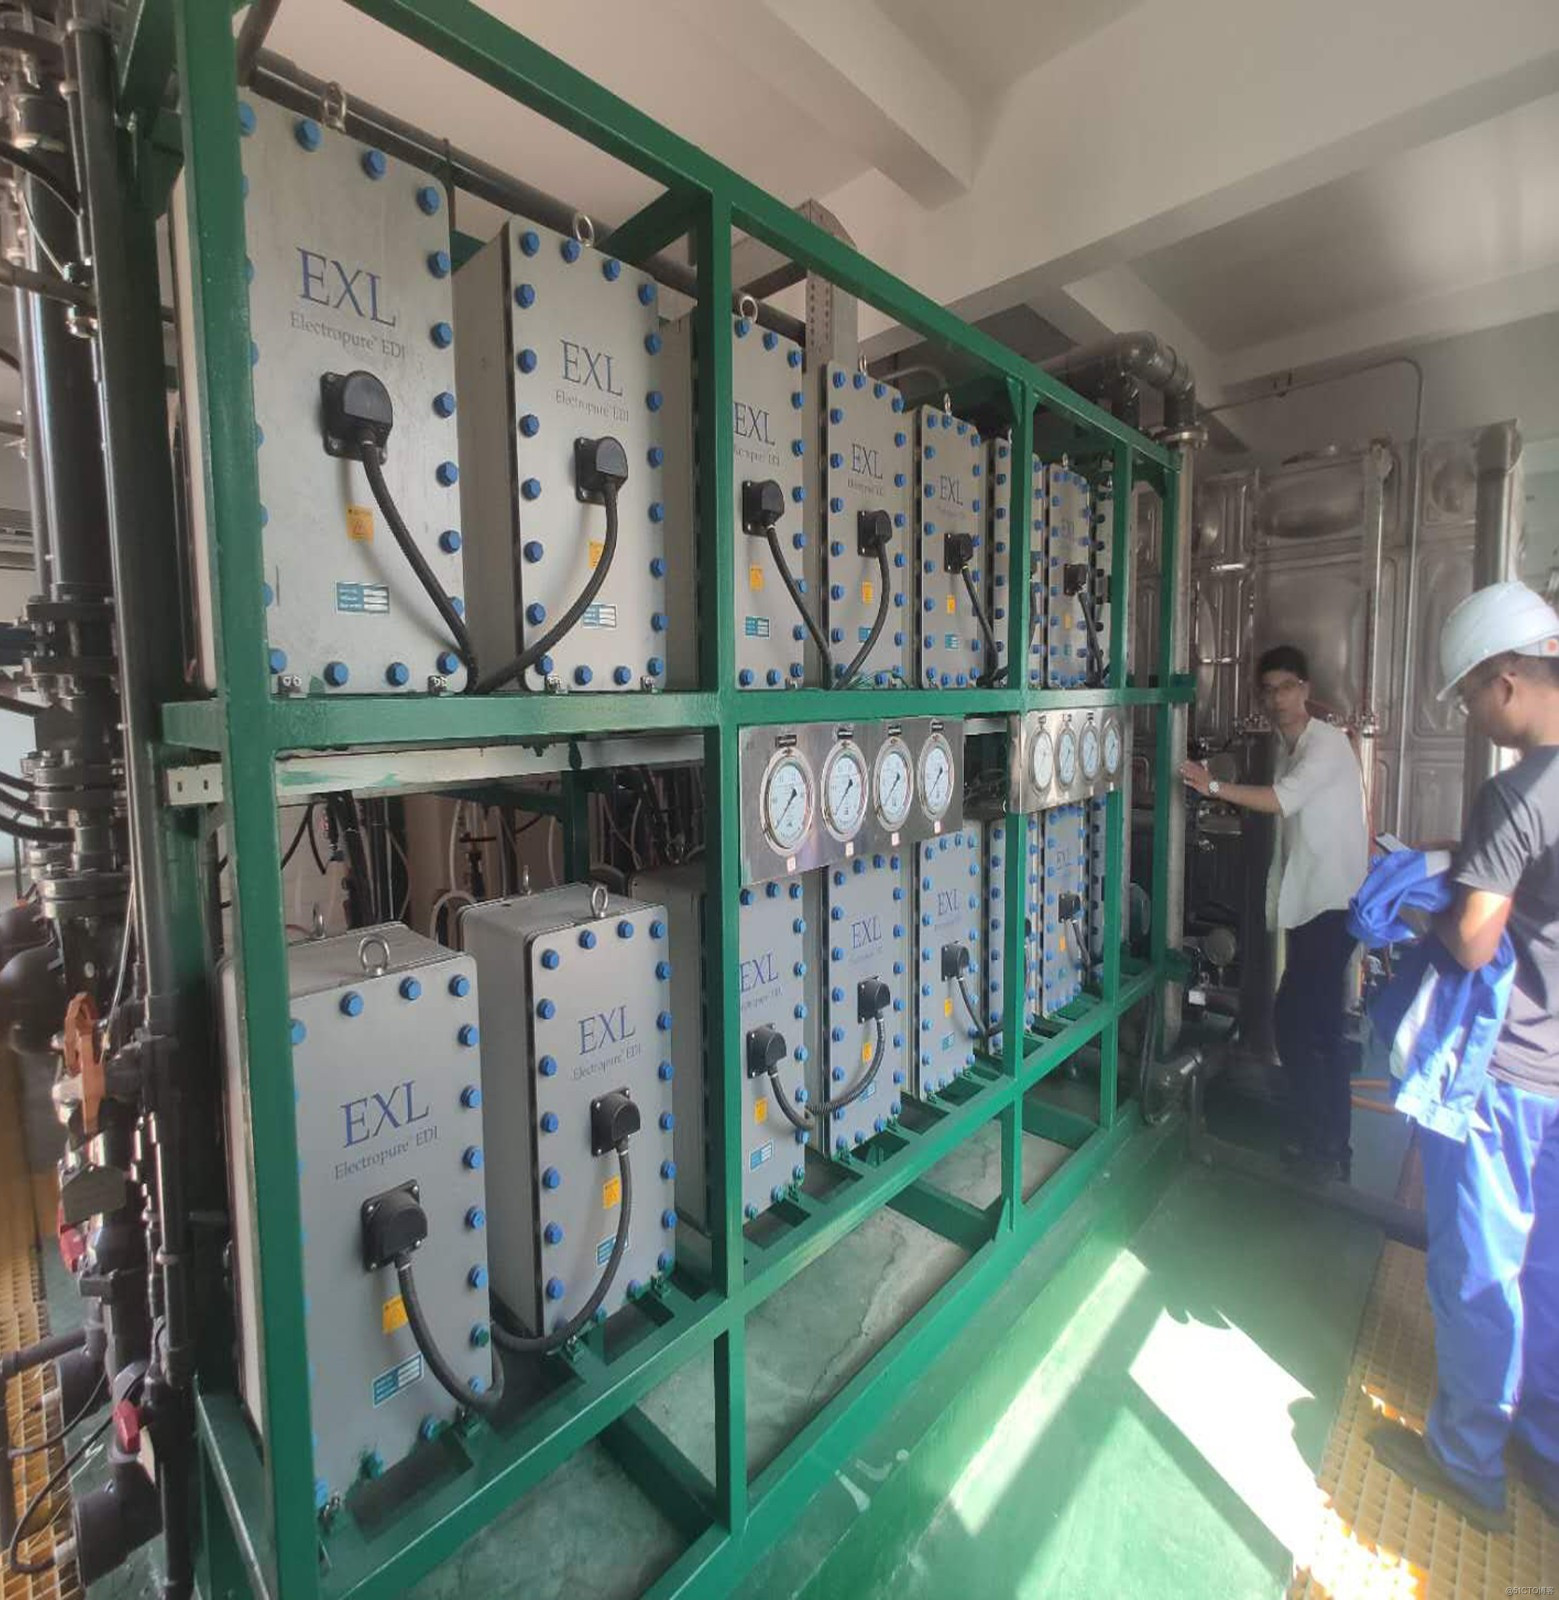 Electropure improves service quality and never stops-Changqing Group project site commissioning